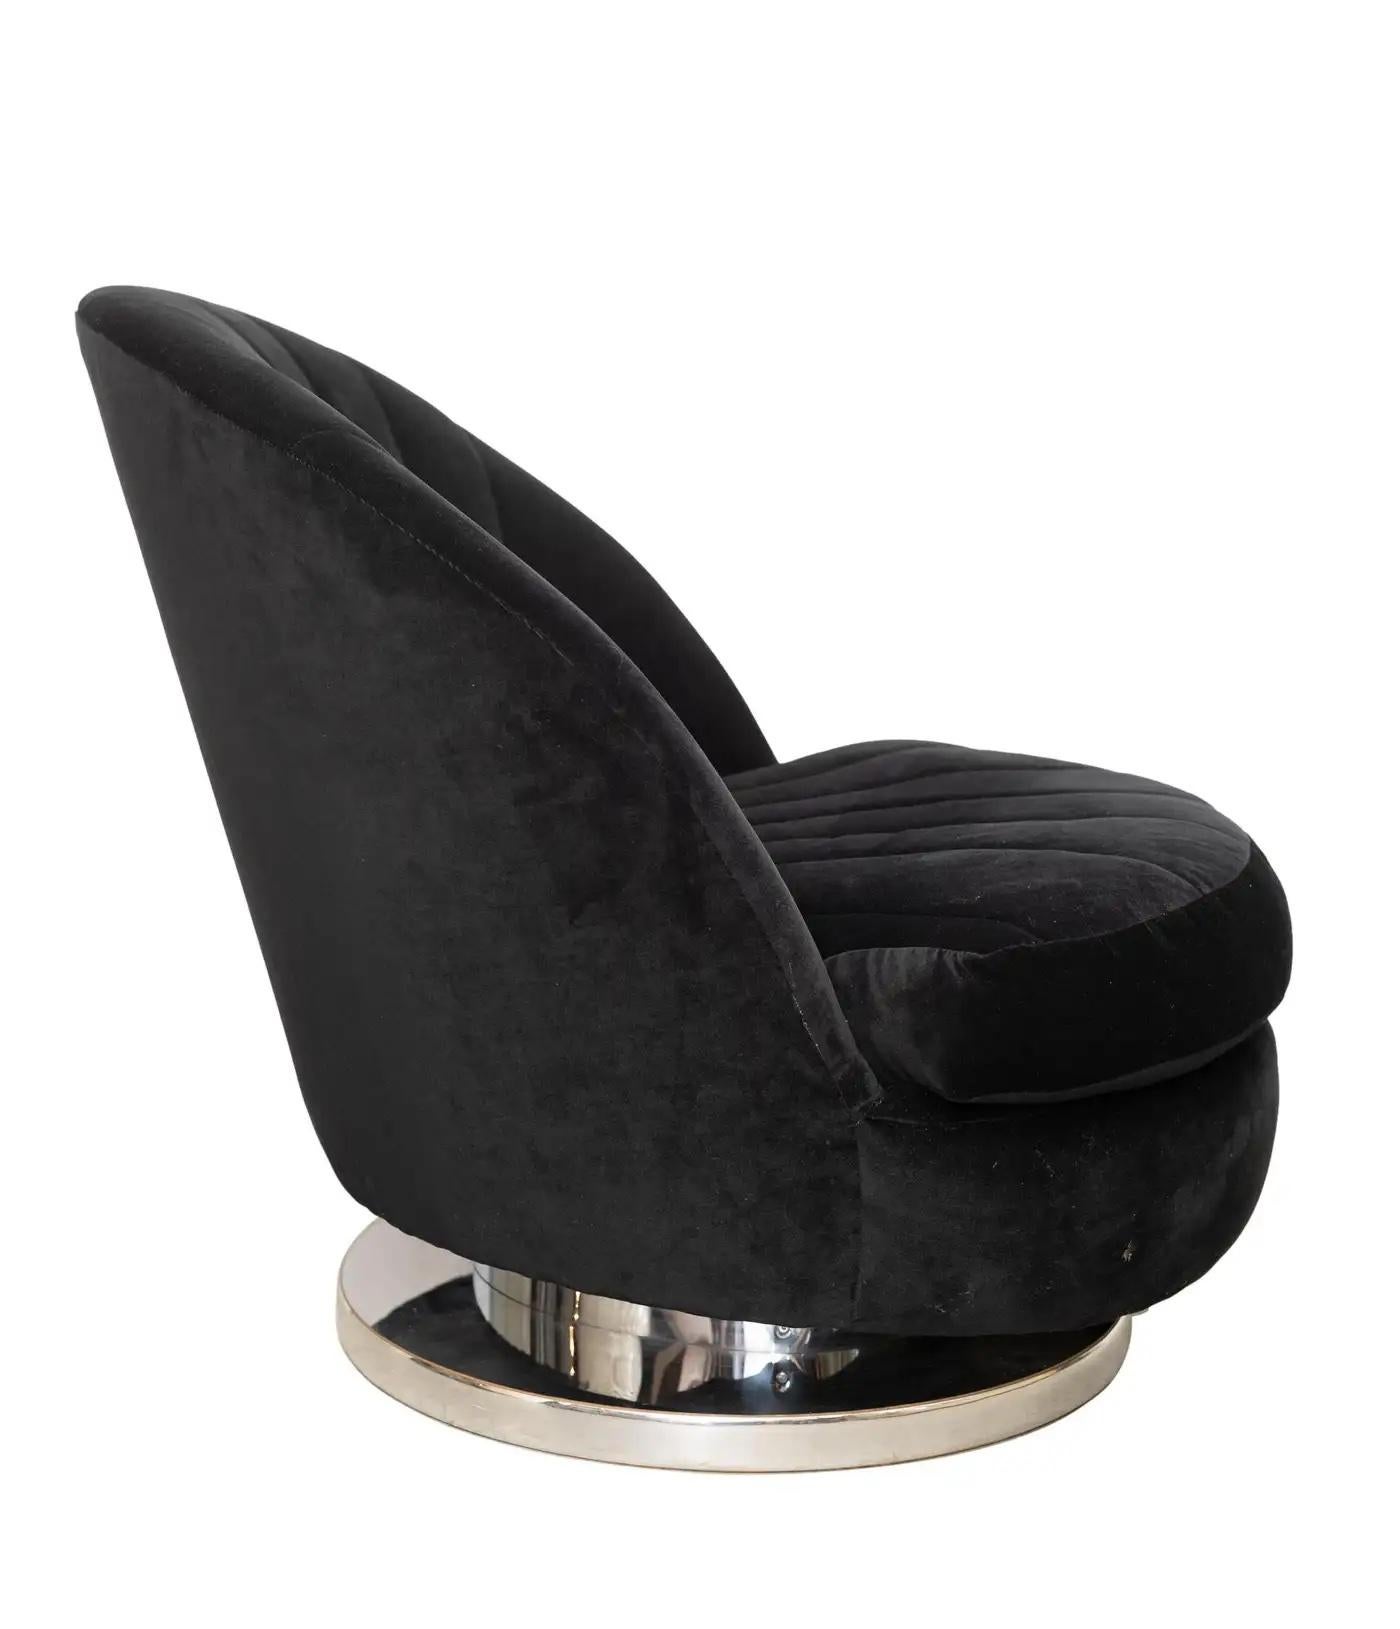 Velvet Pair Iconic Milo Baughman Swivel and Tilt Lounge Chairs in Black, Ca. 1975 For Sale